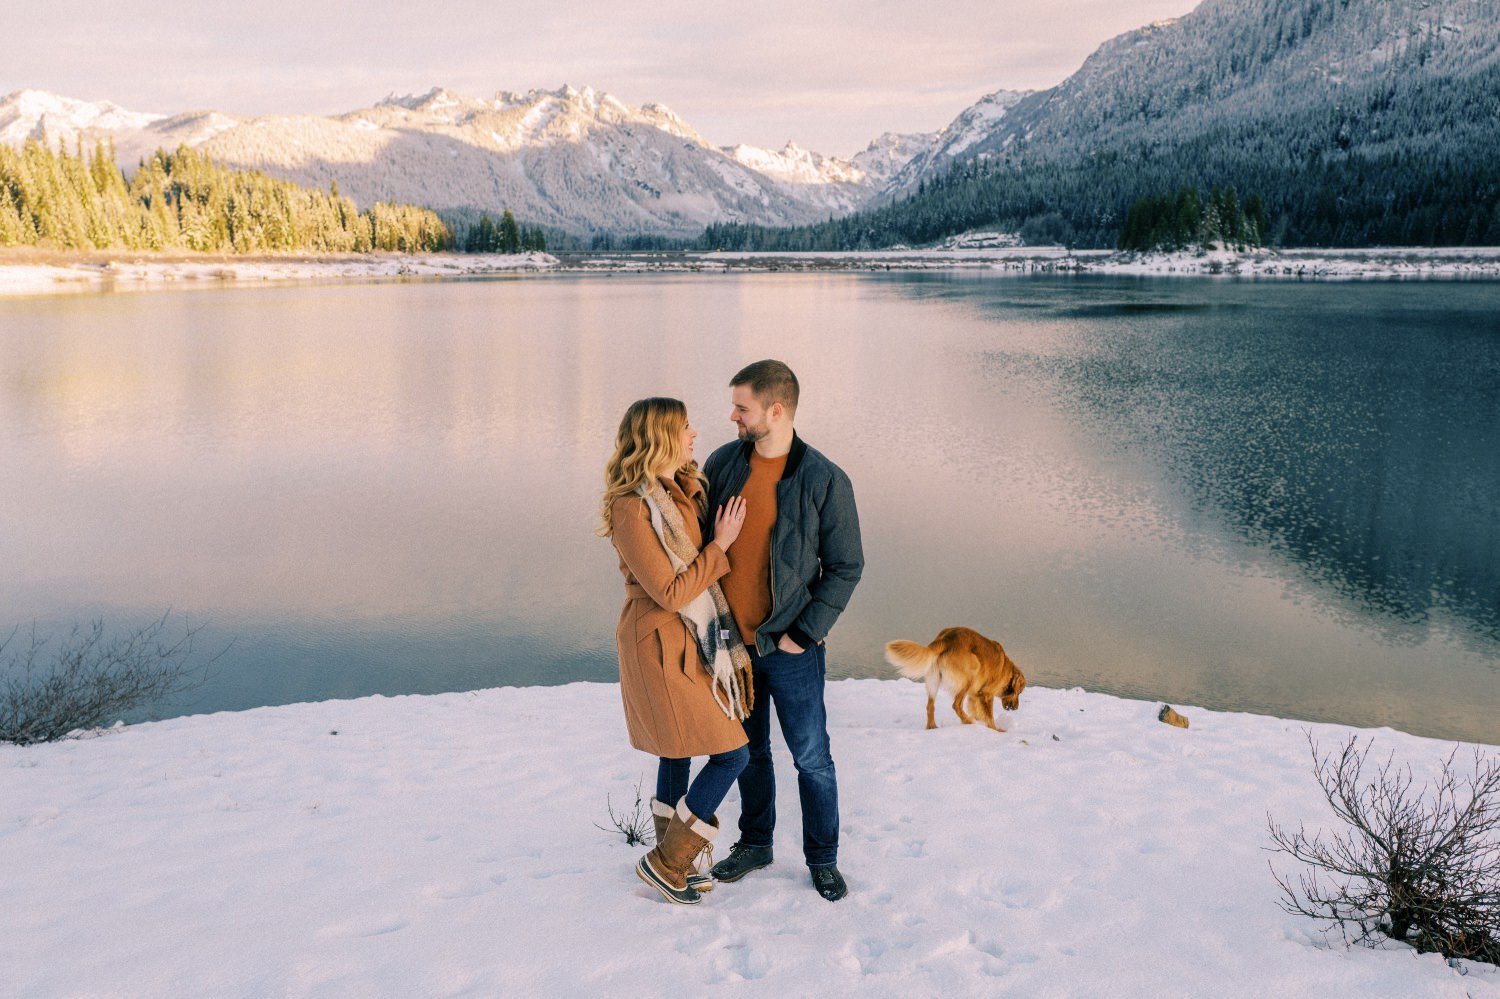 02_Snowy engagement photos at Snoqualmie Pass near Seattle, with a film-like style by Ryan Flynn Photography.jpg